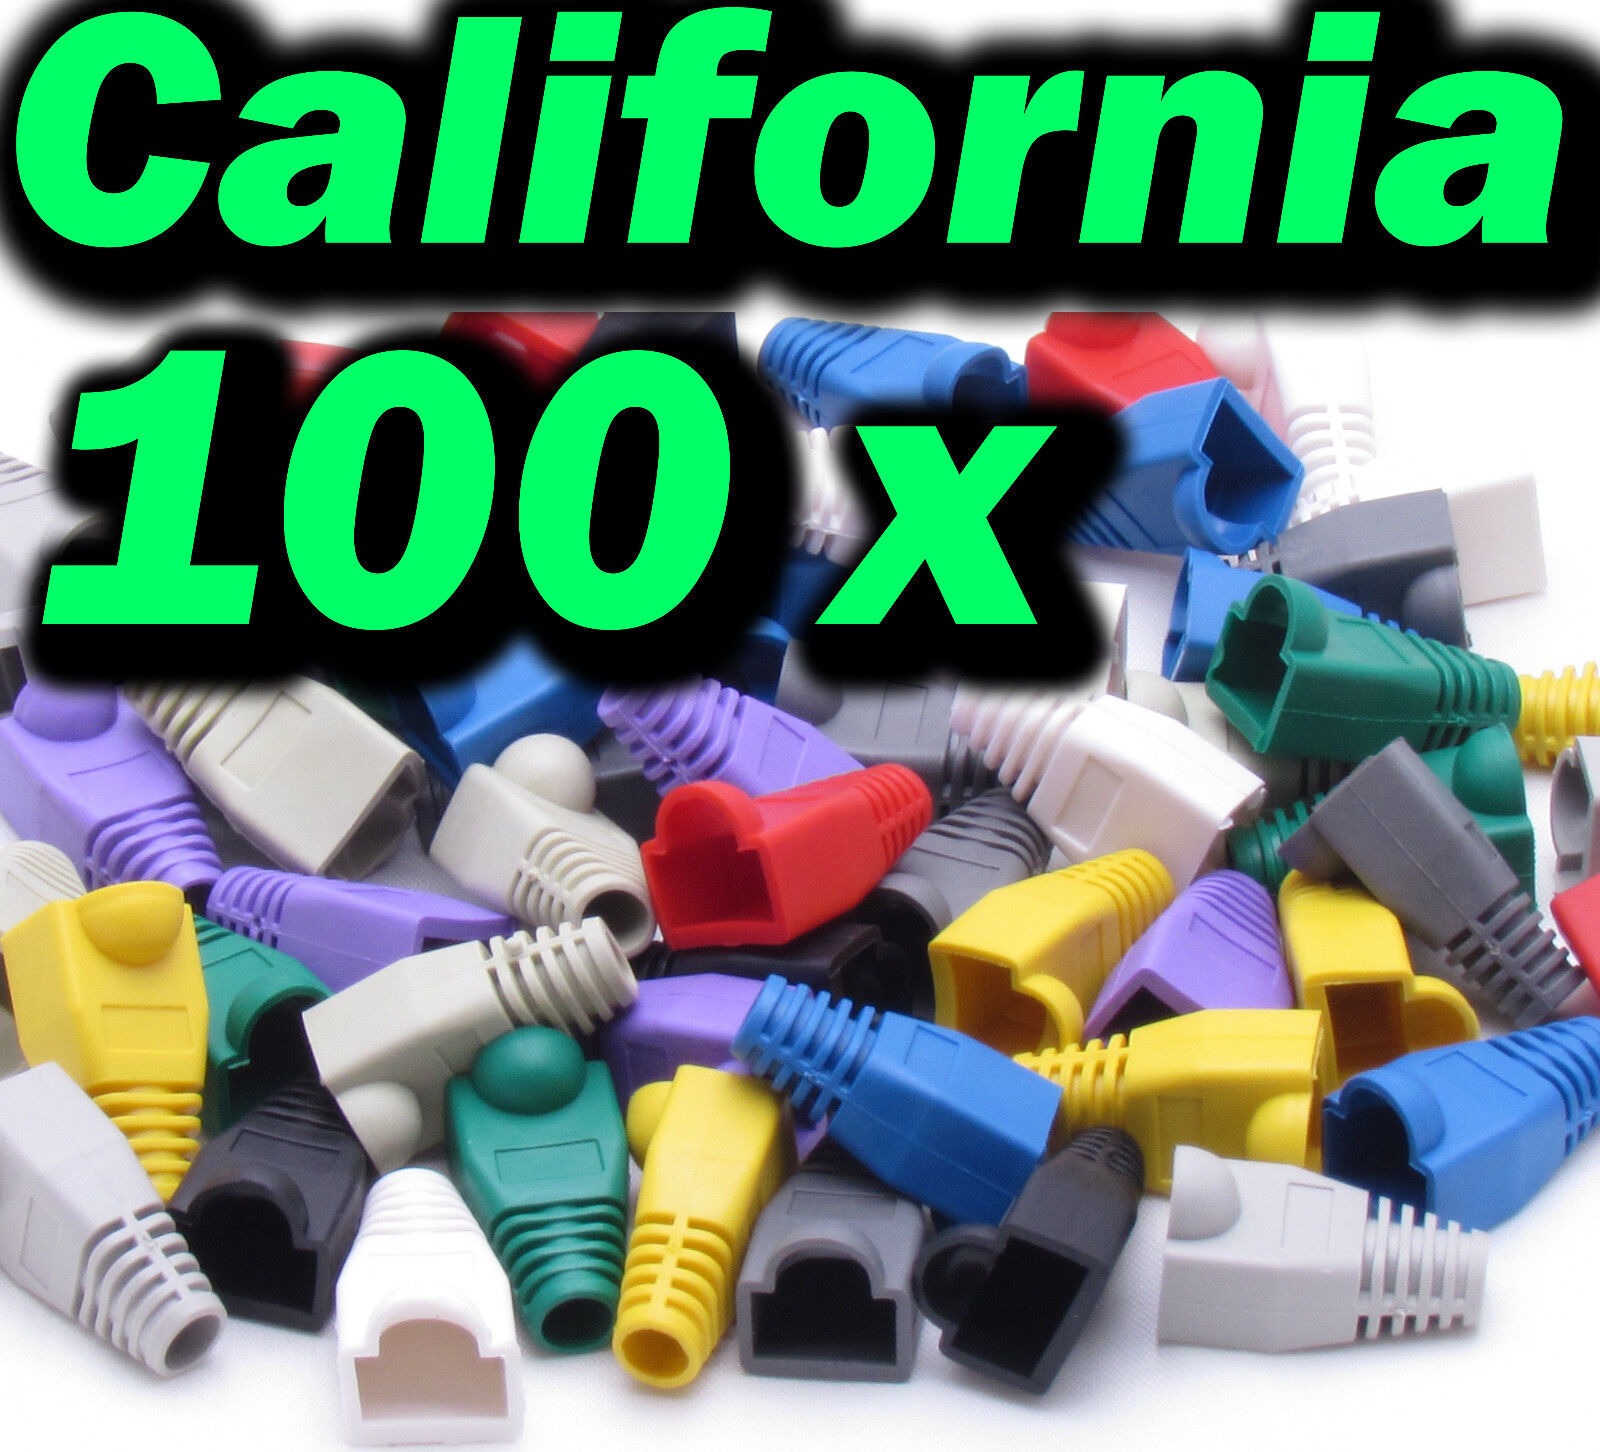 Lot 100 x set RJ45 Connector Modular End Cap Boot Head Cat5 Plug Cat6 Cable 5E  Paxly Does Not Apply